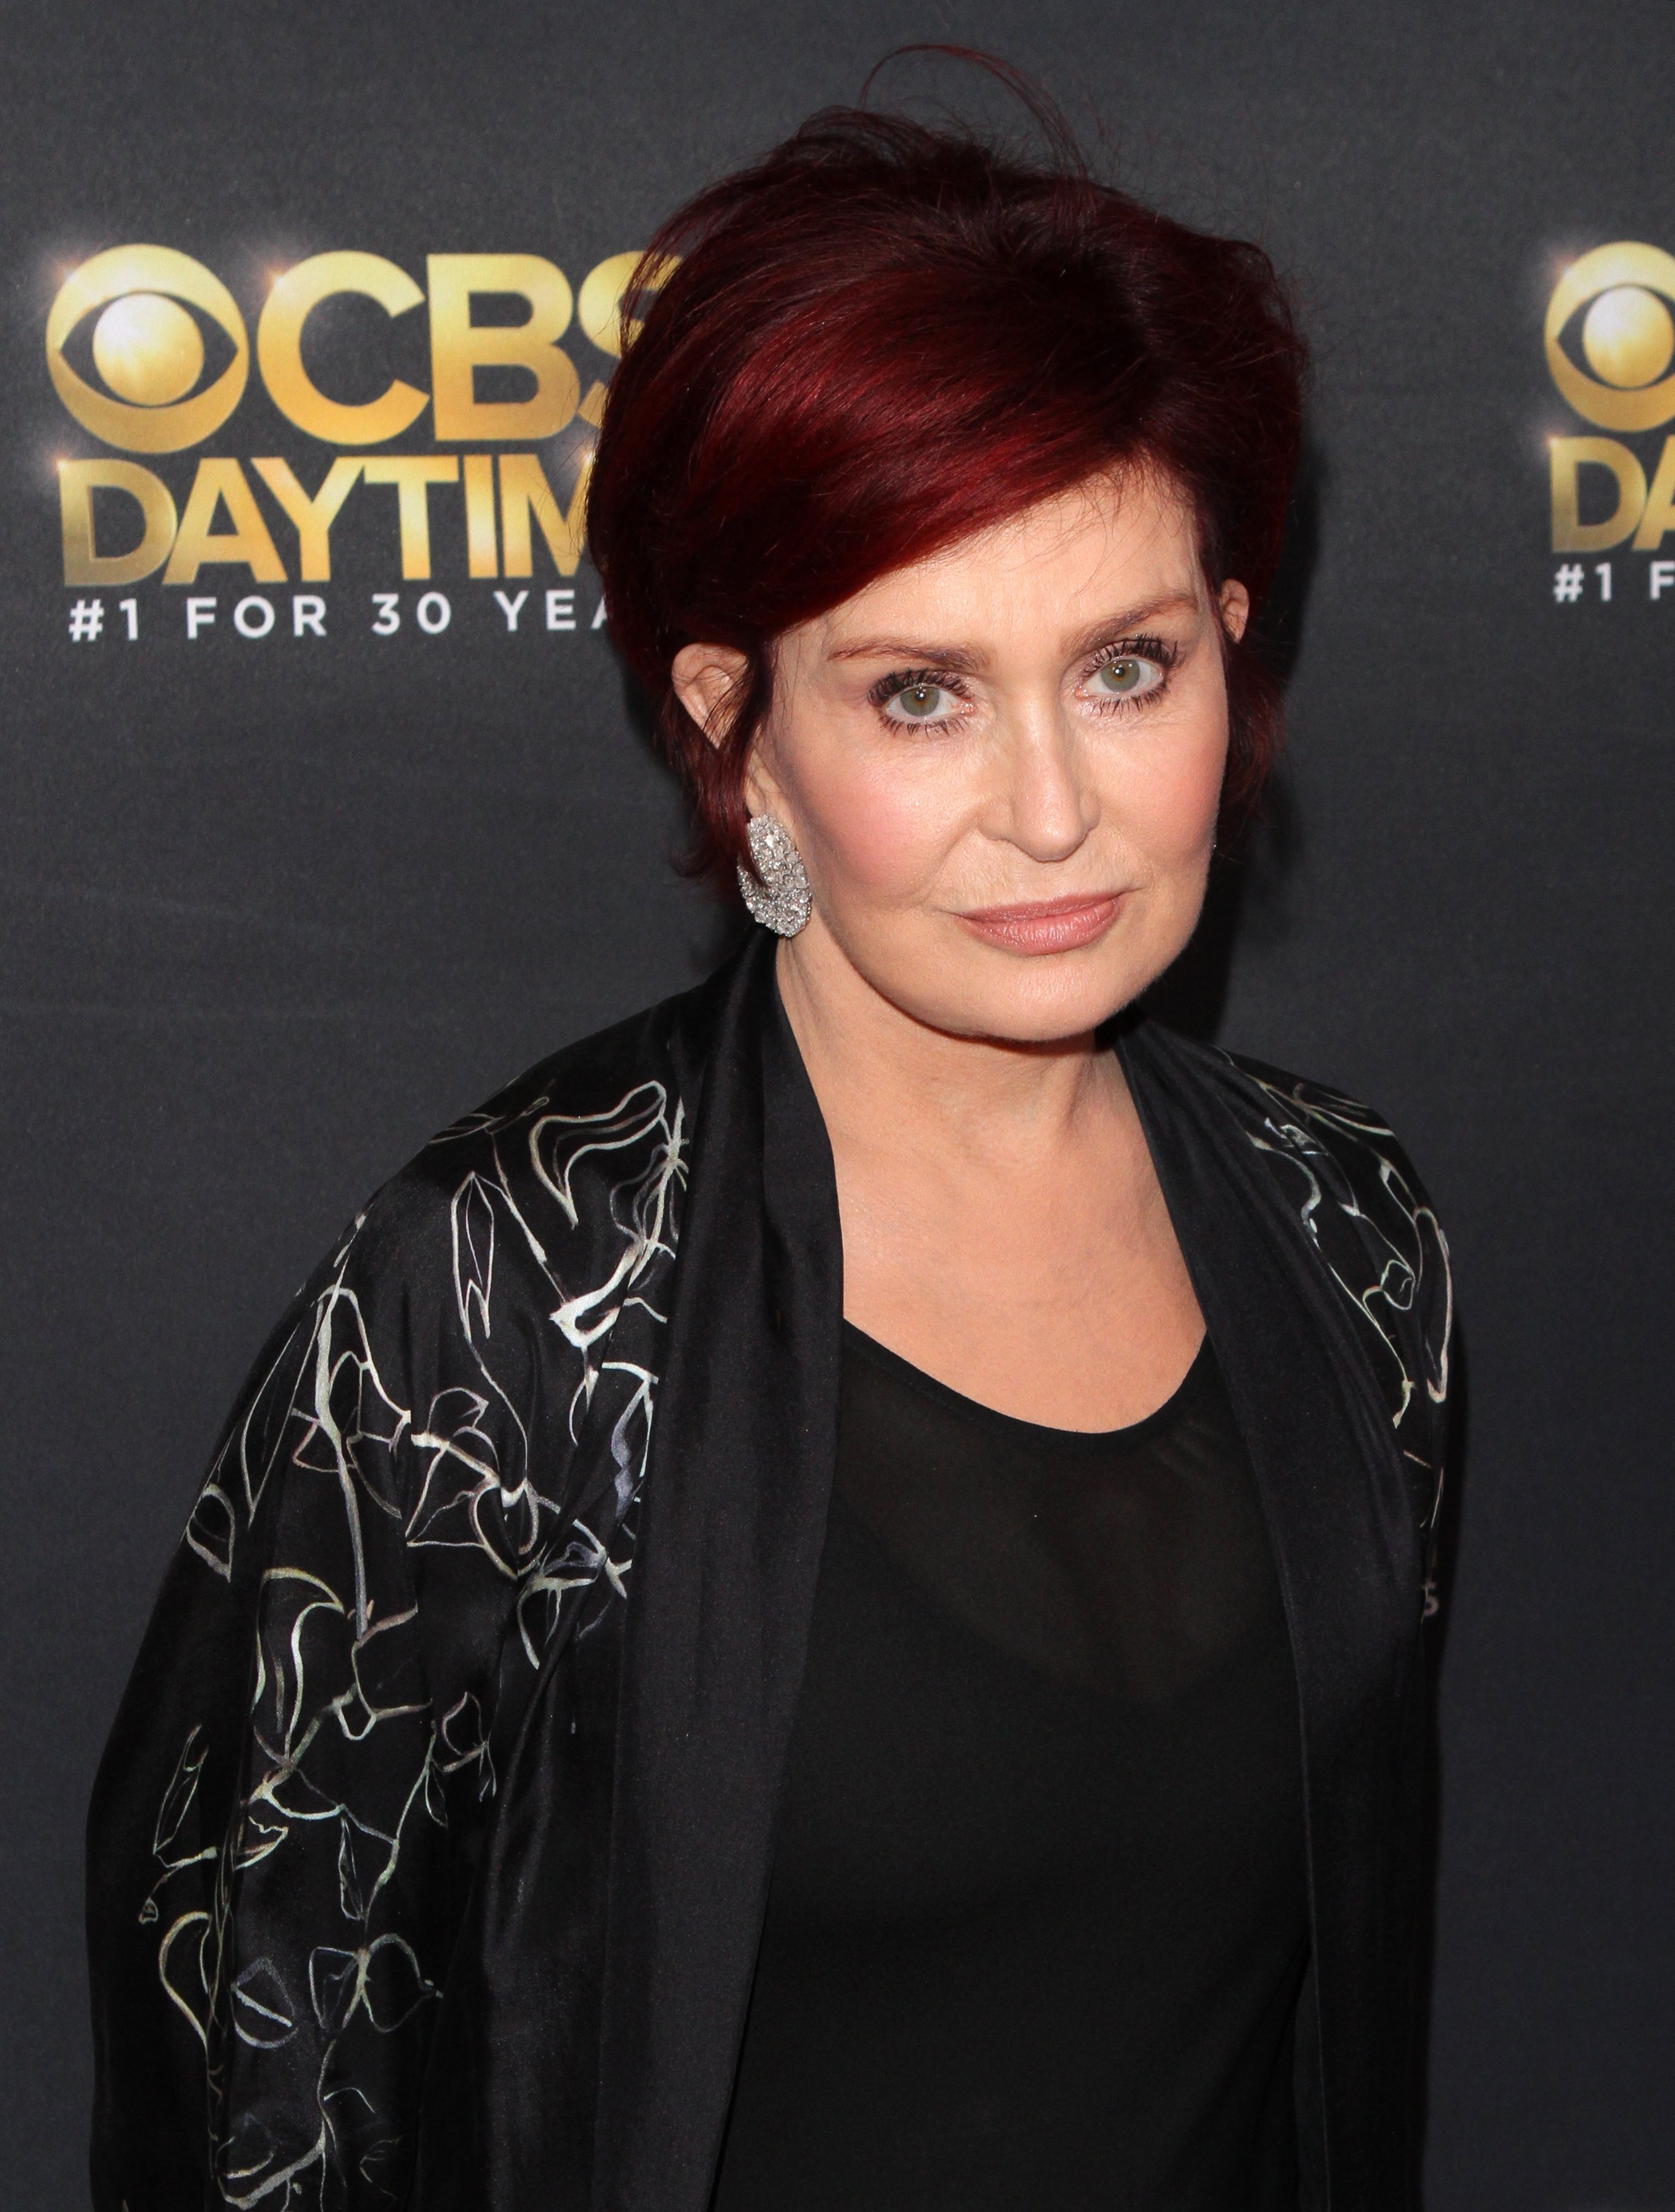  Sharon Osbourne attends the CBS Daytime Emmy after party on April 30, 2017. | Photo: GettyImages